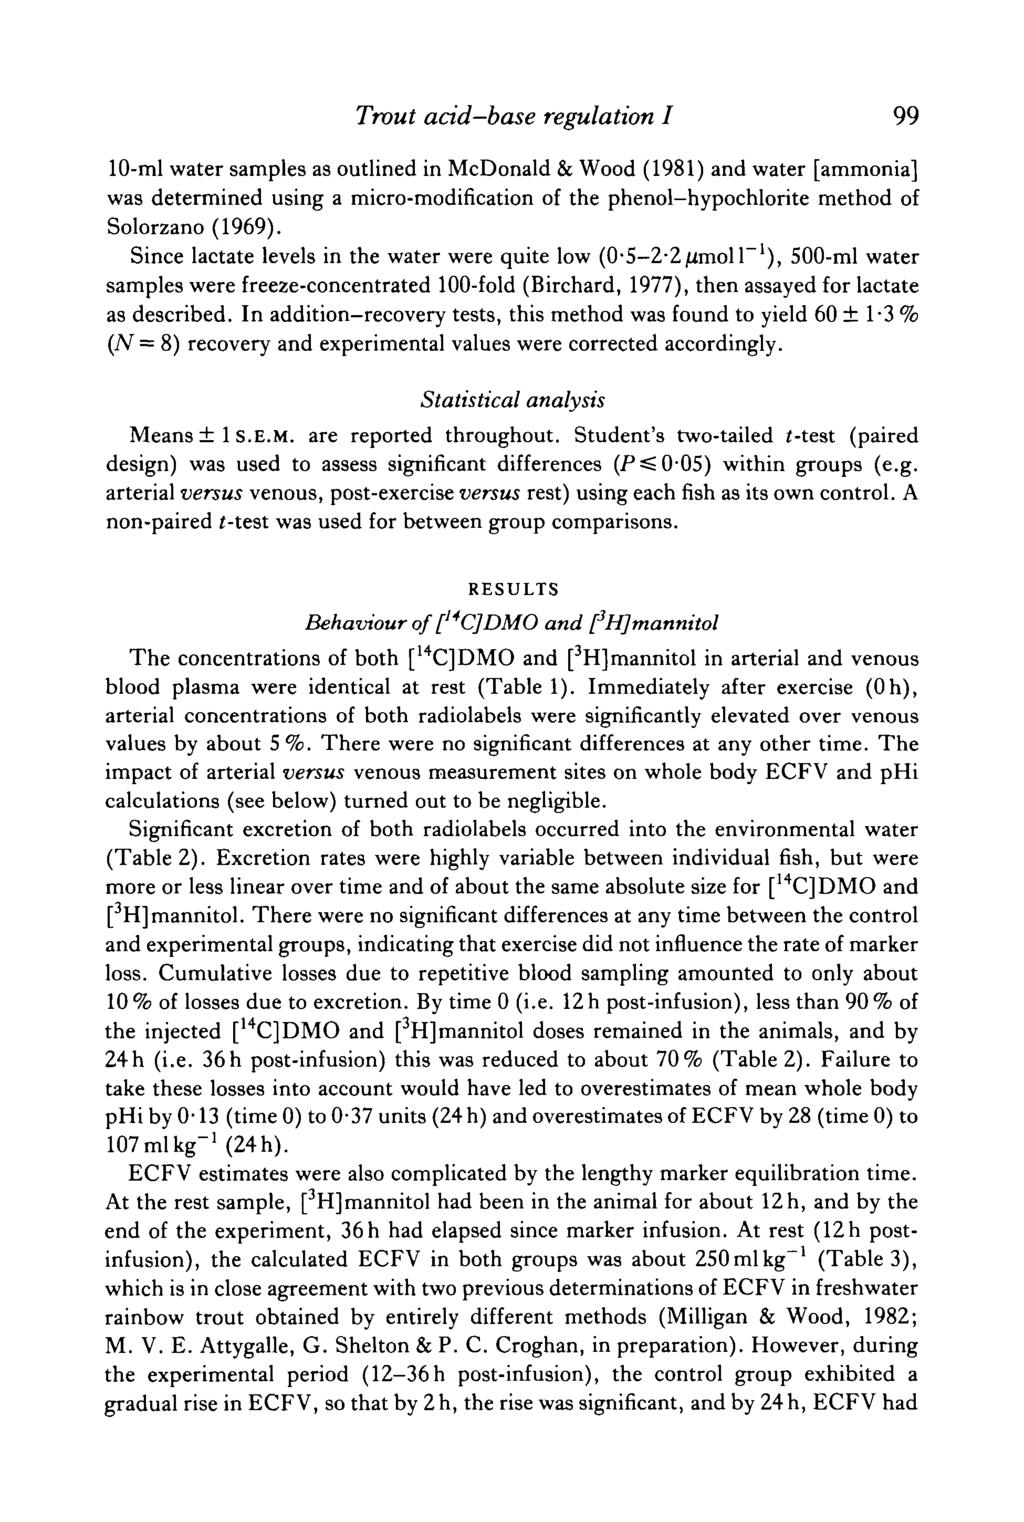 Trout acid-base regulation I 99 10-ml water samples as outlined in McDonald & Wood (1981) and water [ammonia] was determined using a micro-modification of the phenol-hypochlorite method of Solorzano